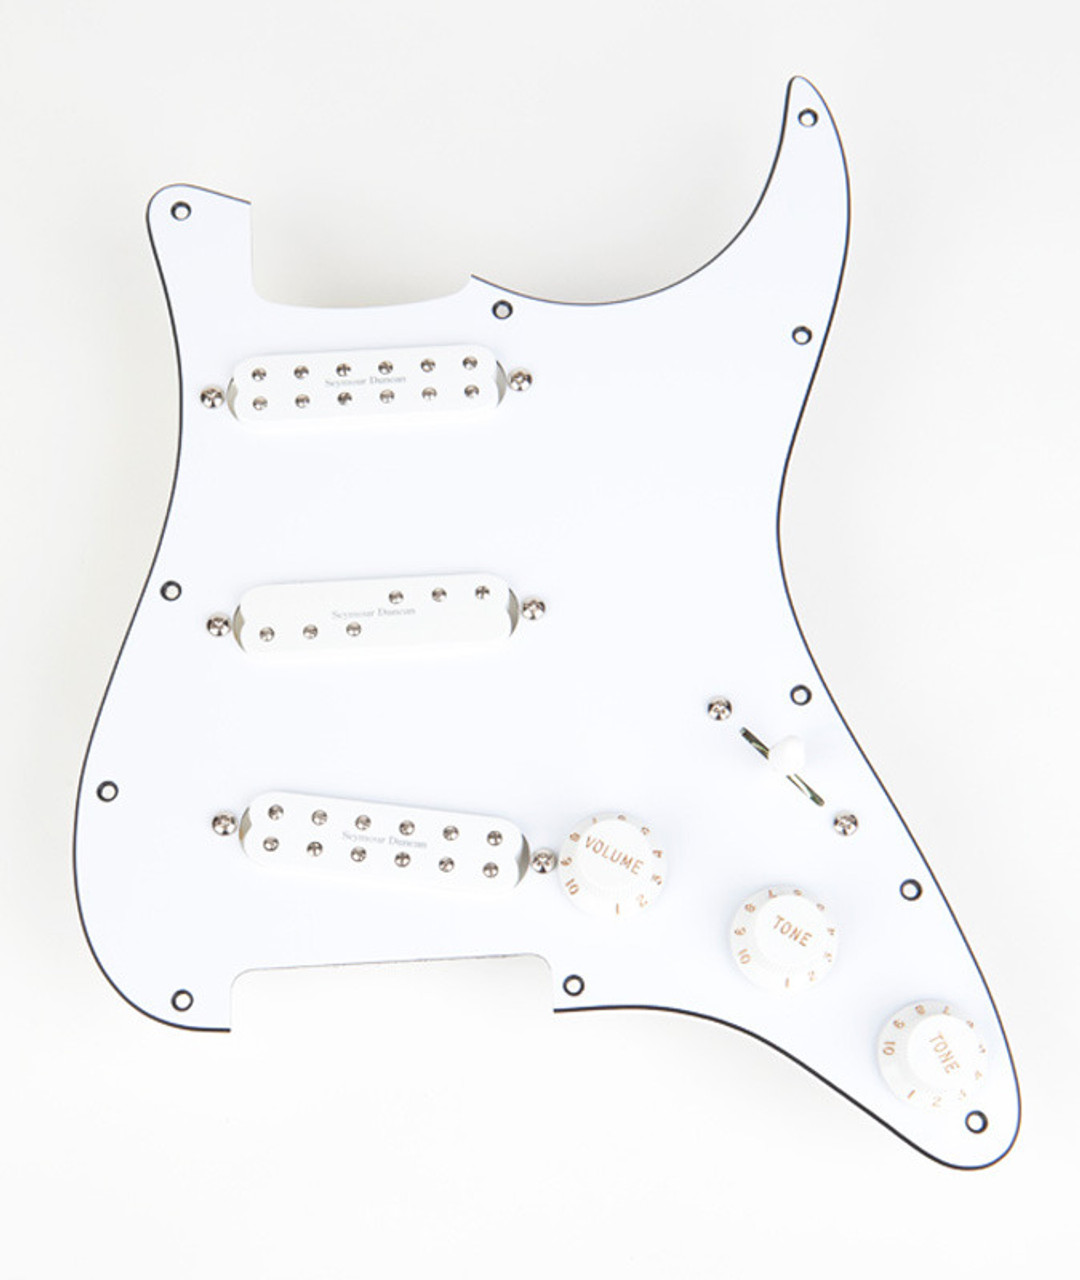 Seymour Duncan Everything Axe Pre-wired pickguard / pickup set for Strat